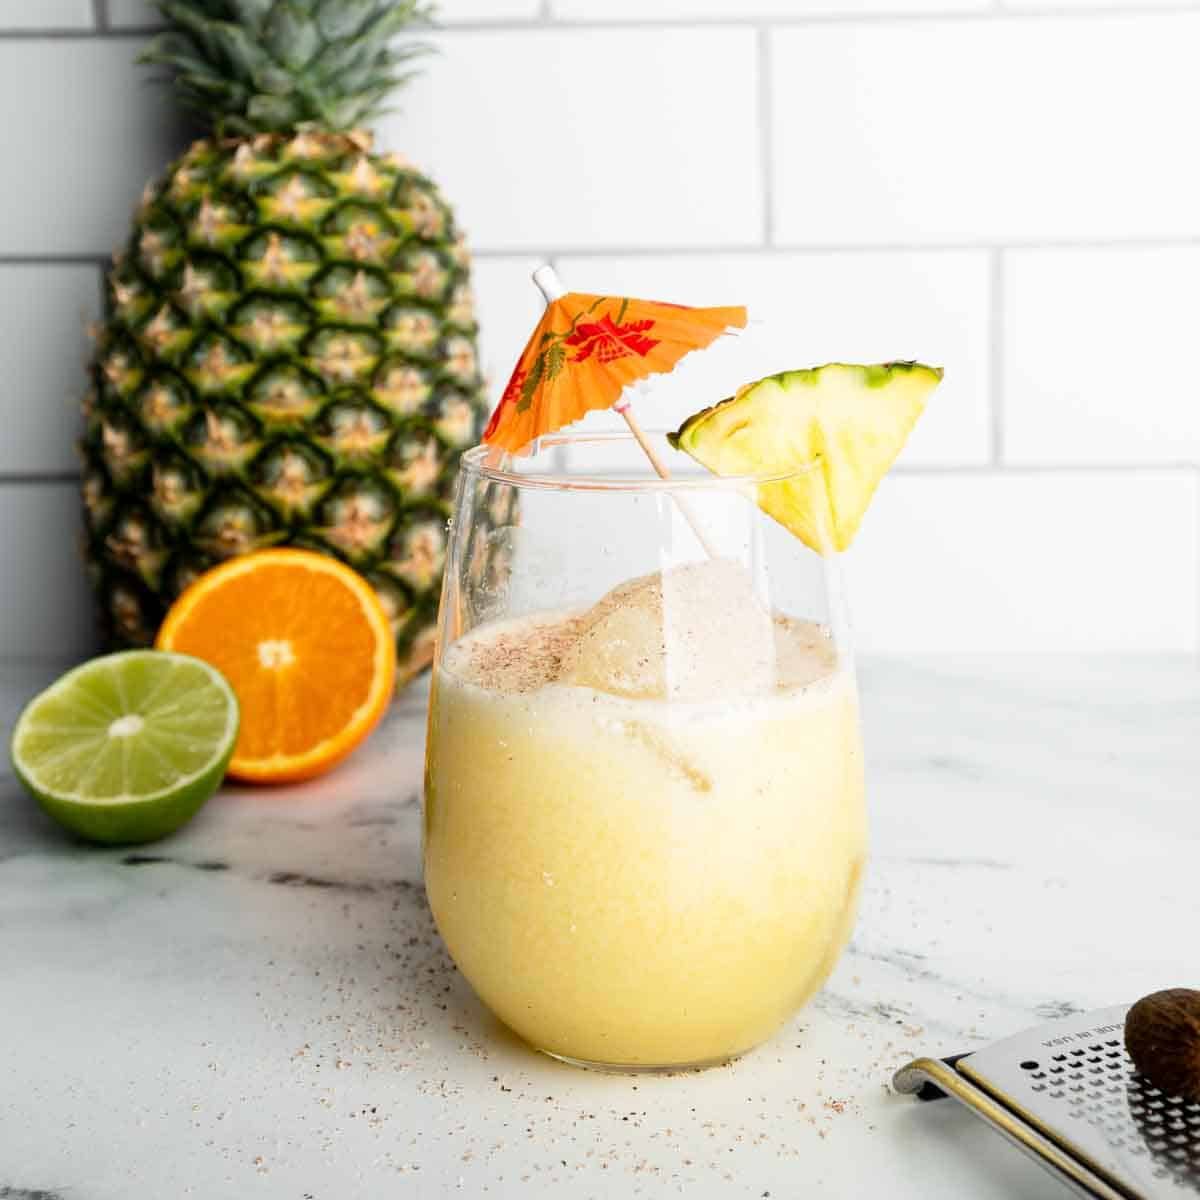 Tropical Pineapple and Coconut Mocktail (Virgin Painkiller)